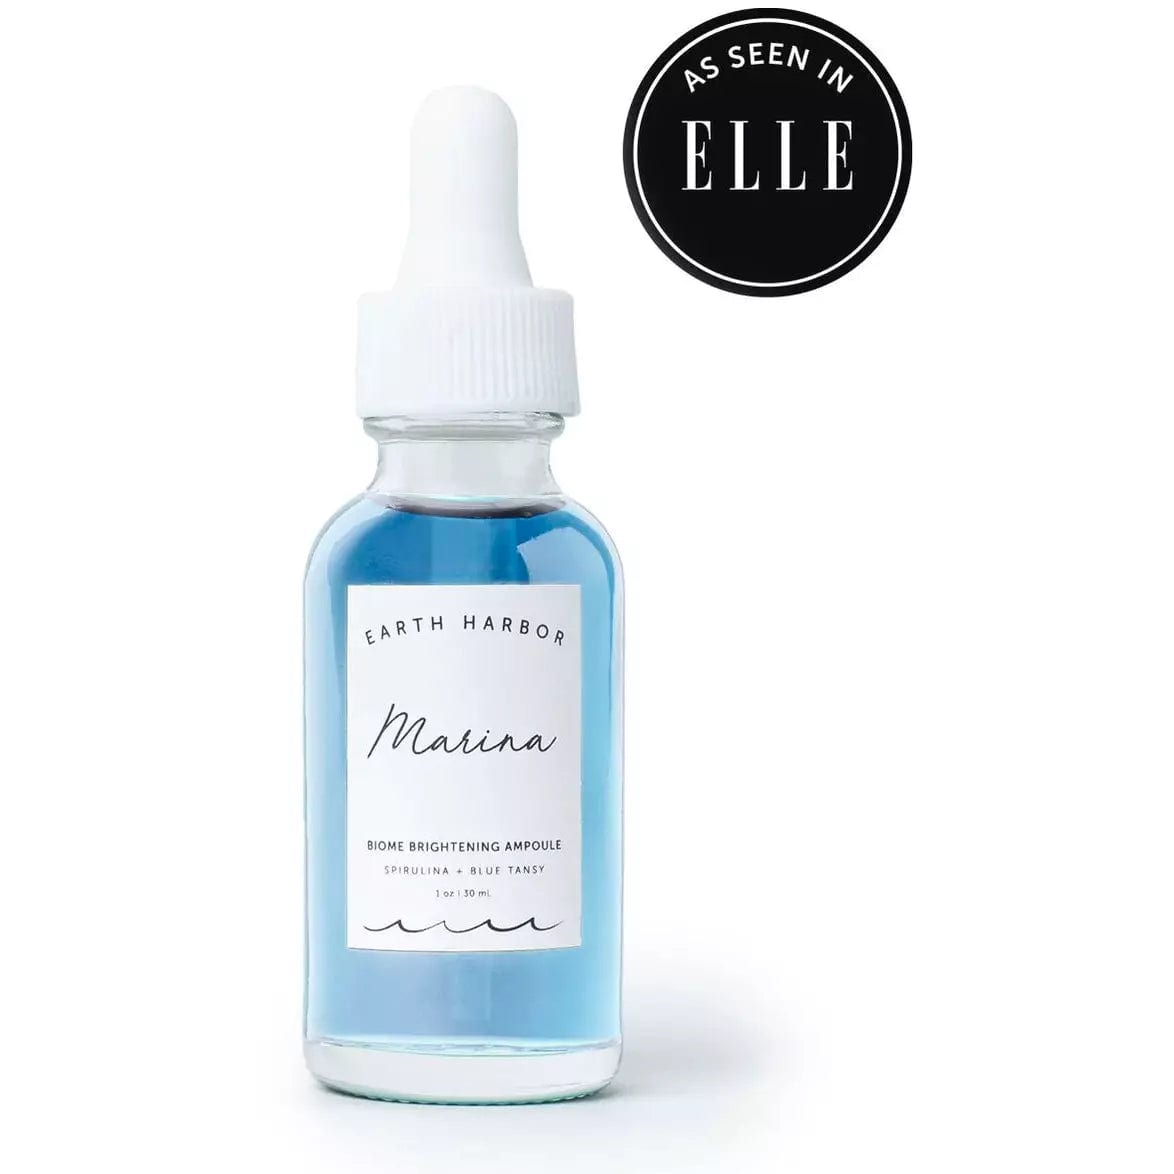 Load image into Gallery viewer, Earth Harbor Naturals Marina Biome Brightening Elixir
